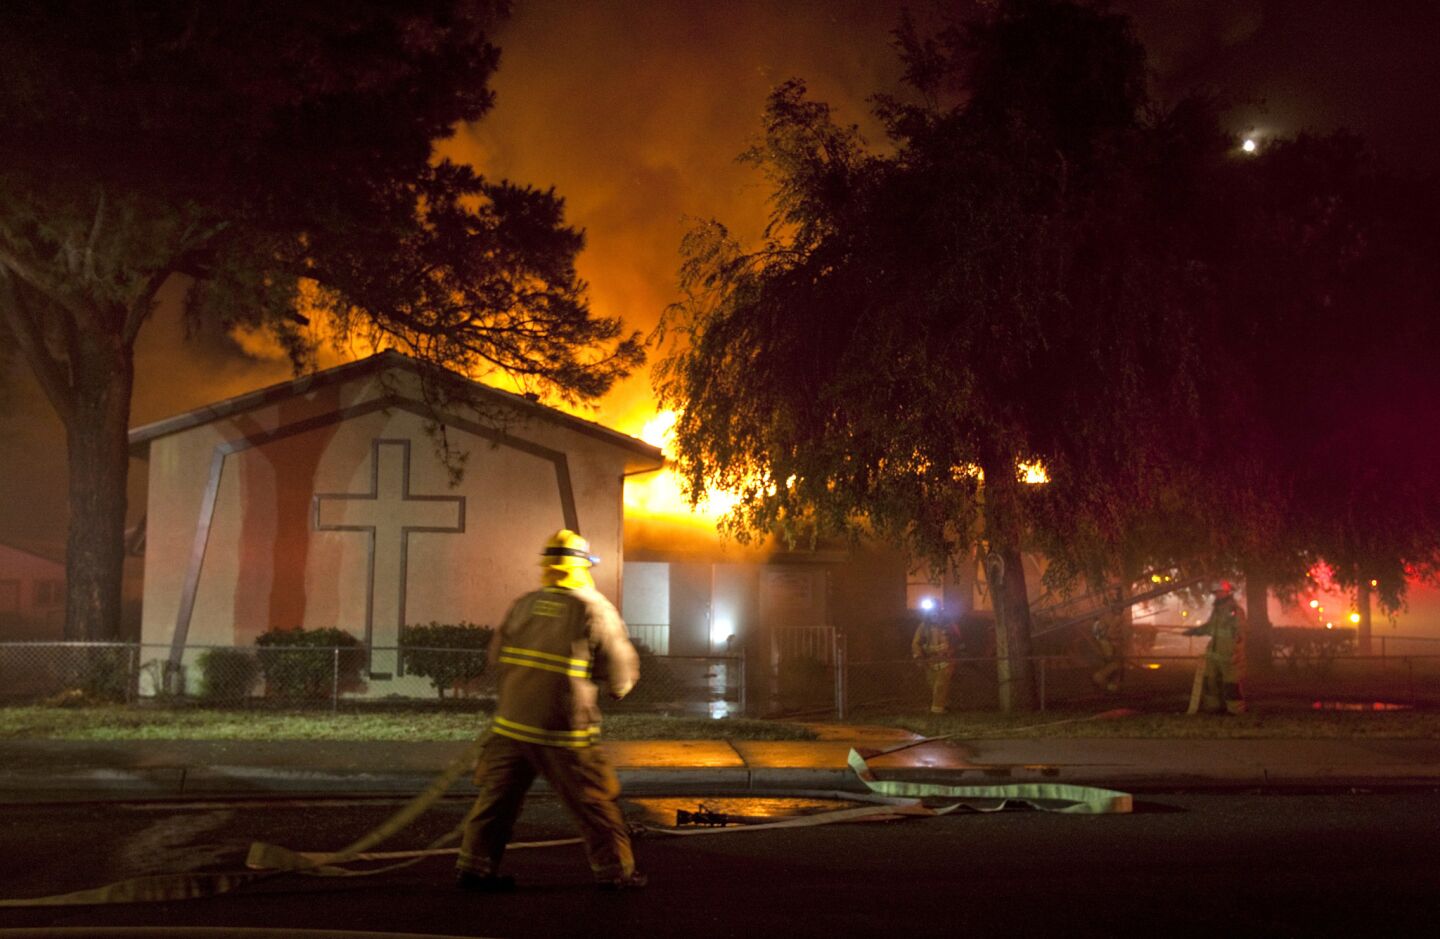 Calvary Assembly Church on Cedar Street in downtown Escondido is engulfed in flames. Crews battling wildfires in the area saw their resources stretched further by the church fire.